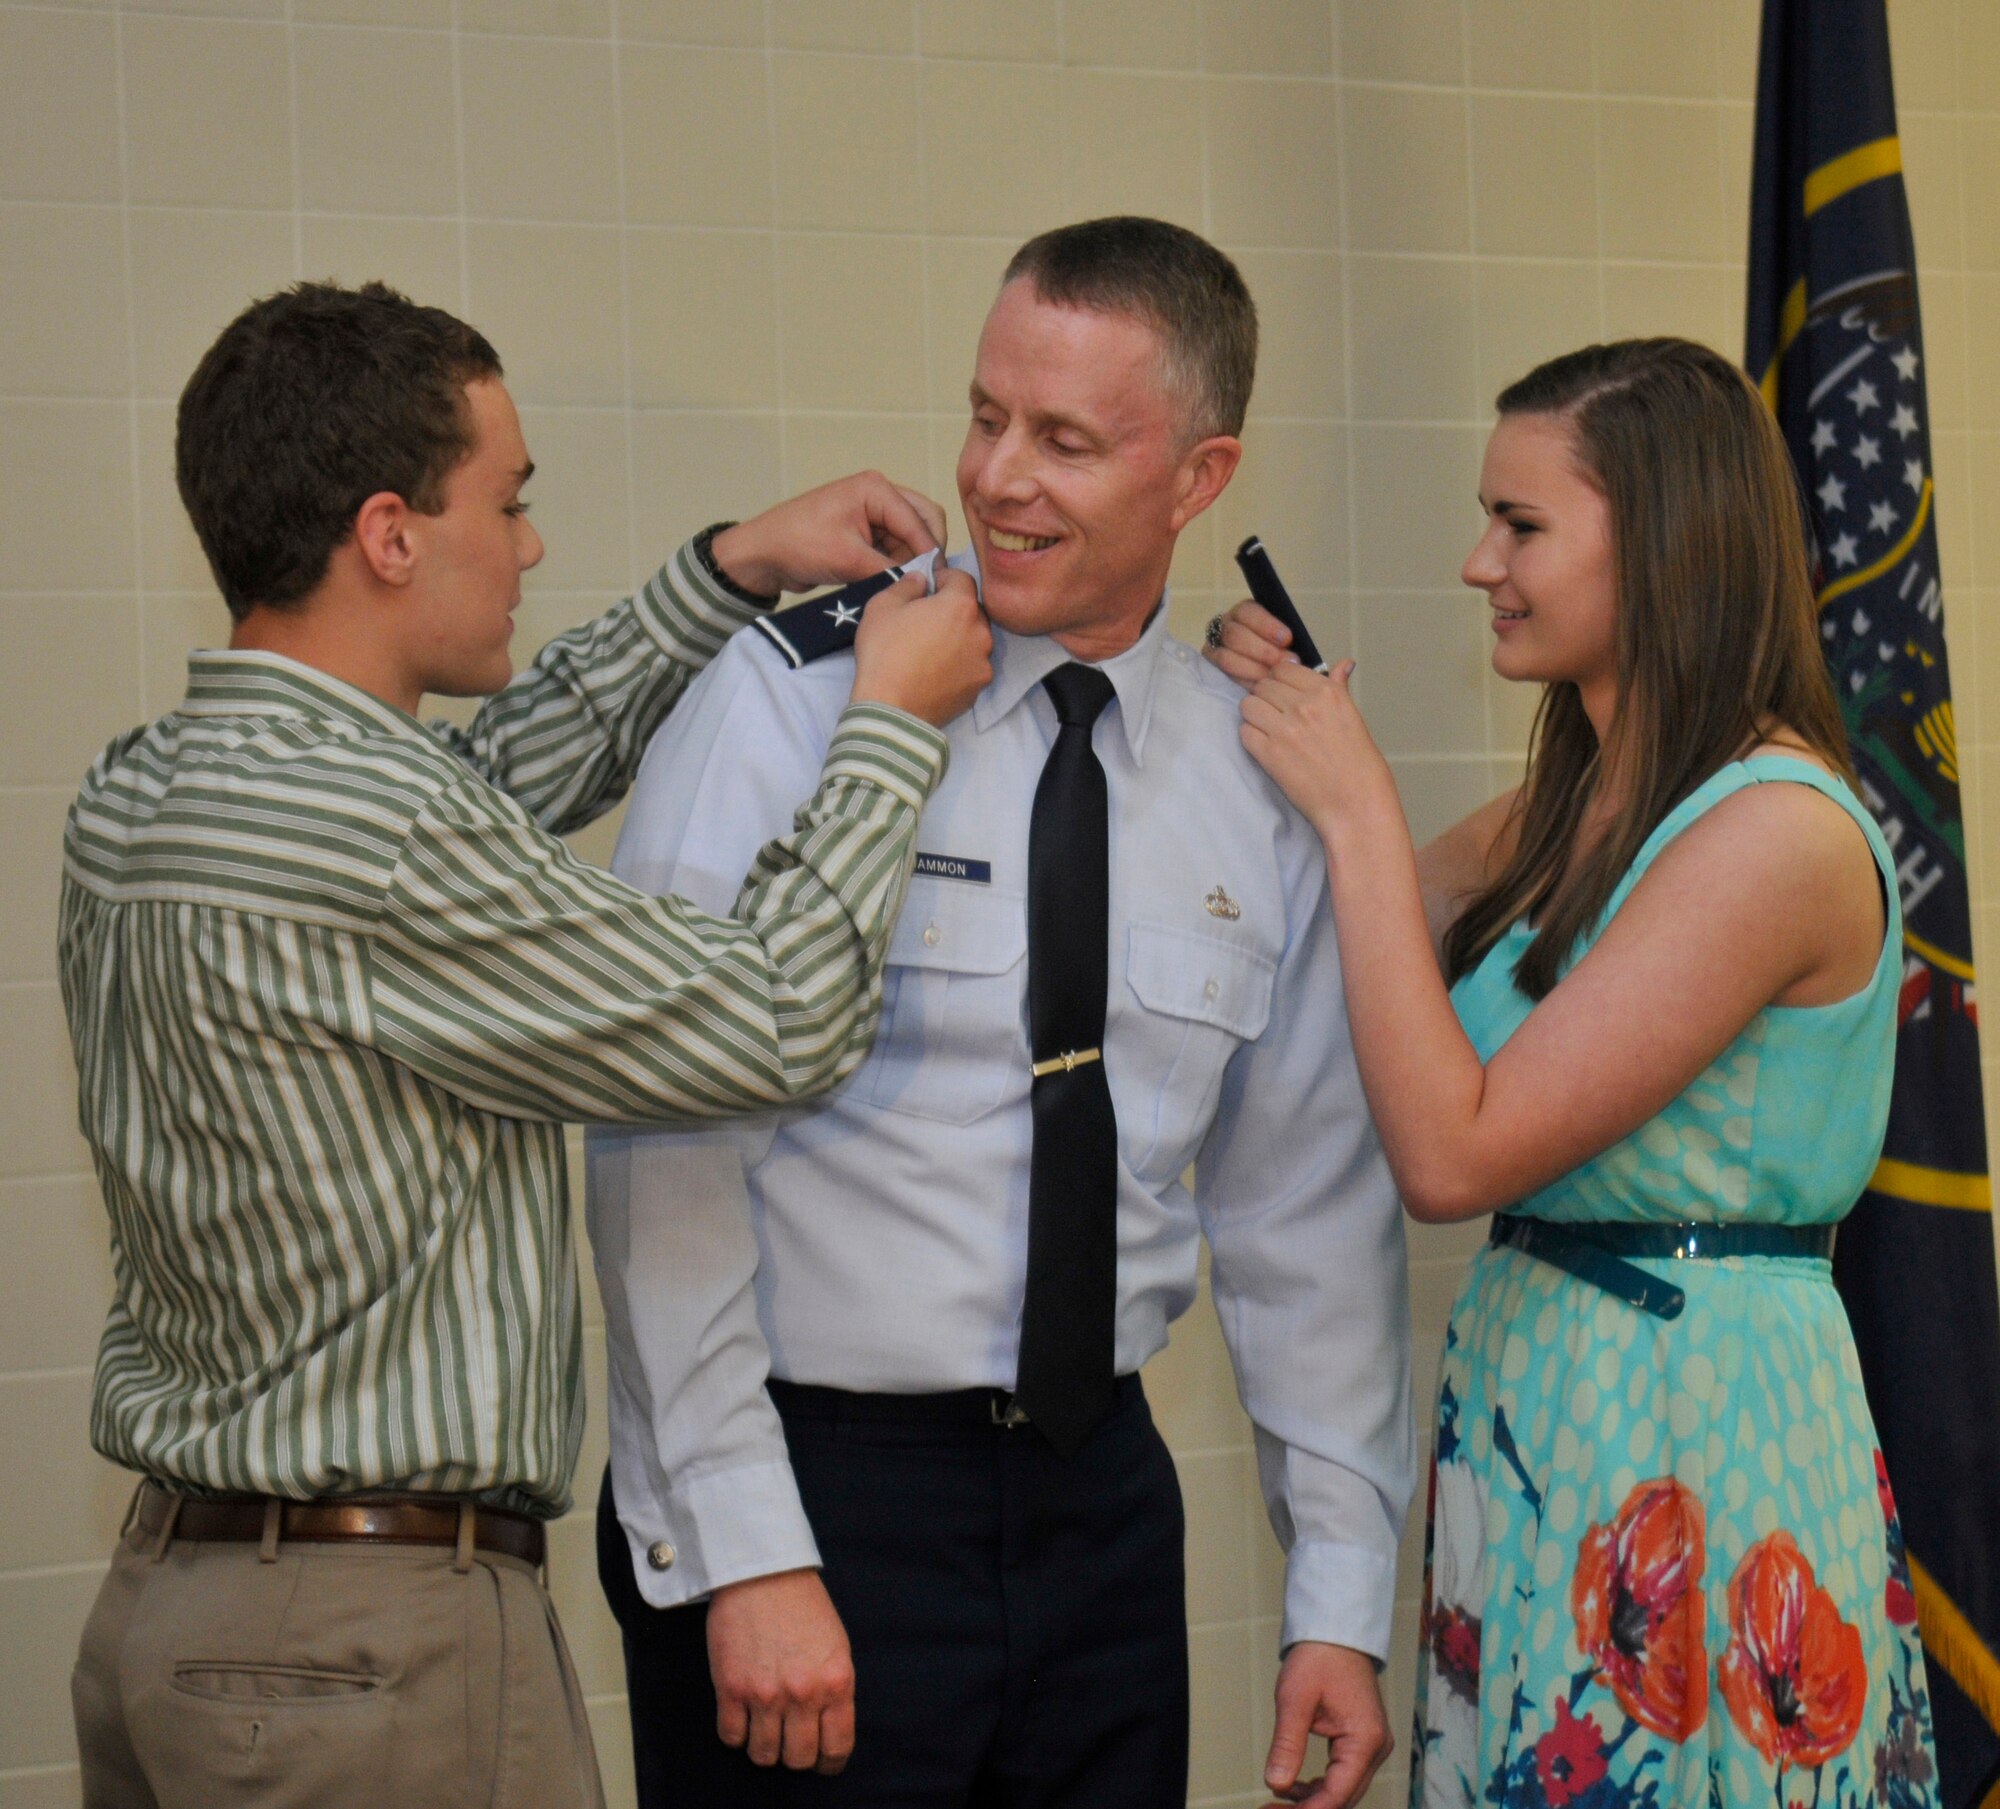 Brig. Gen. Kenneth L. Gammon, Chief of Staff, Utah Joint Force Headquarters Air, has his new rank pinned on by his son Kyle and daughter Gabriella, at his promotion ceremony at the Utah Air National Guard Base in Salt Lake City, on July 14, 2012. (U.S. Air Force photo by Tech. Sgt. Jeremy Giacolletti-Stegall)(Released)